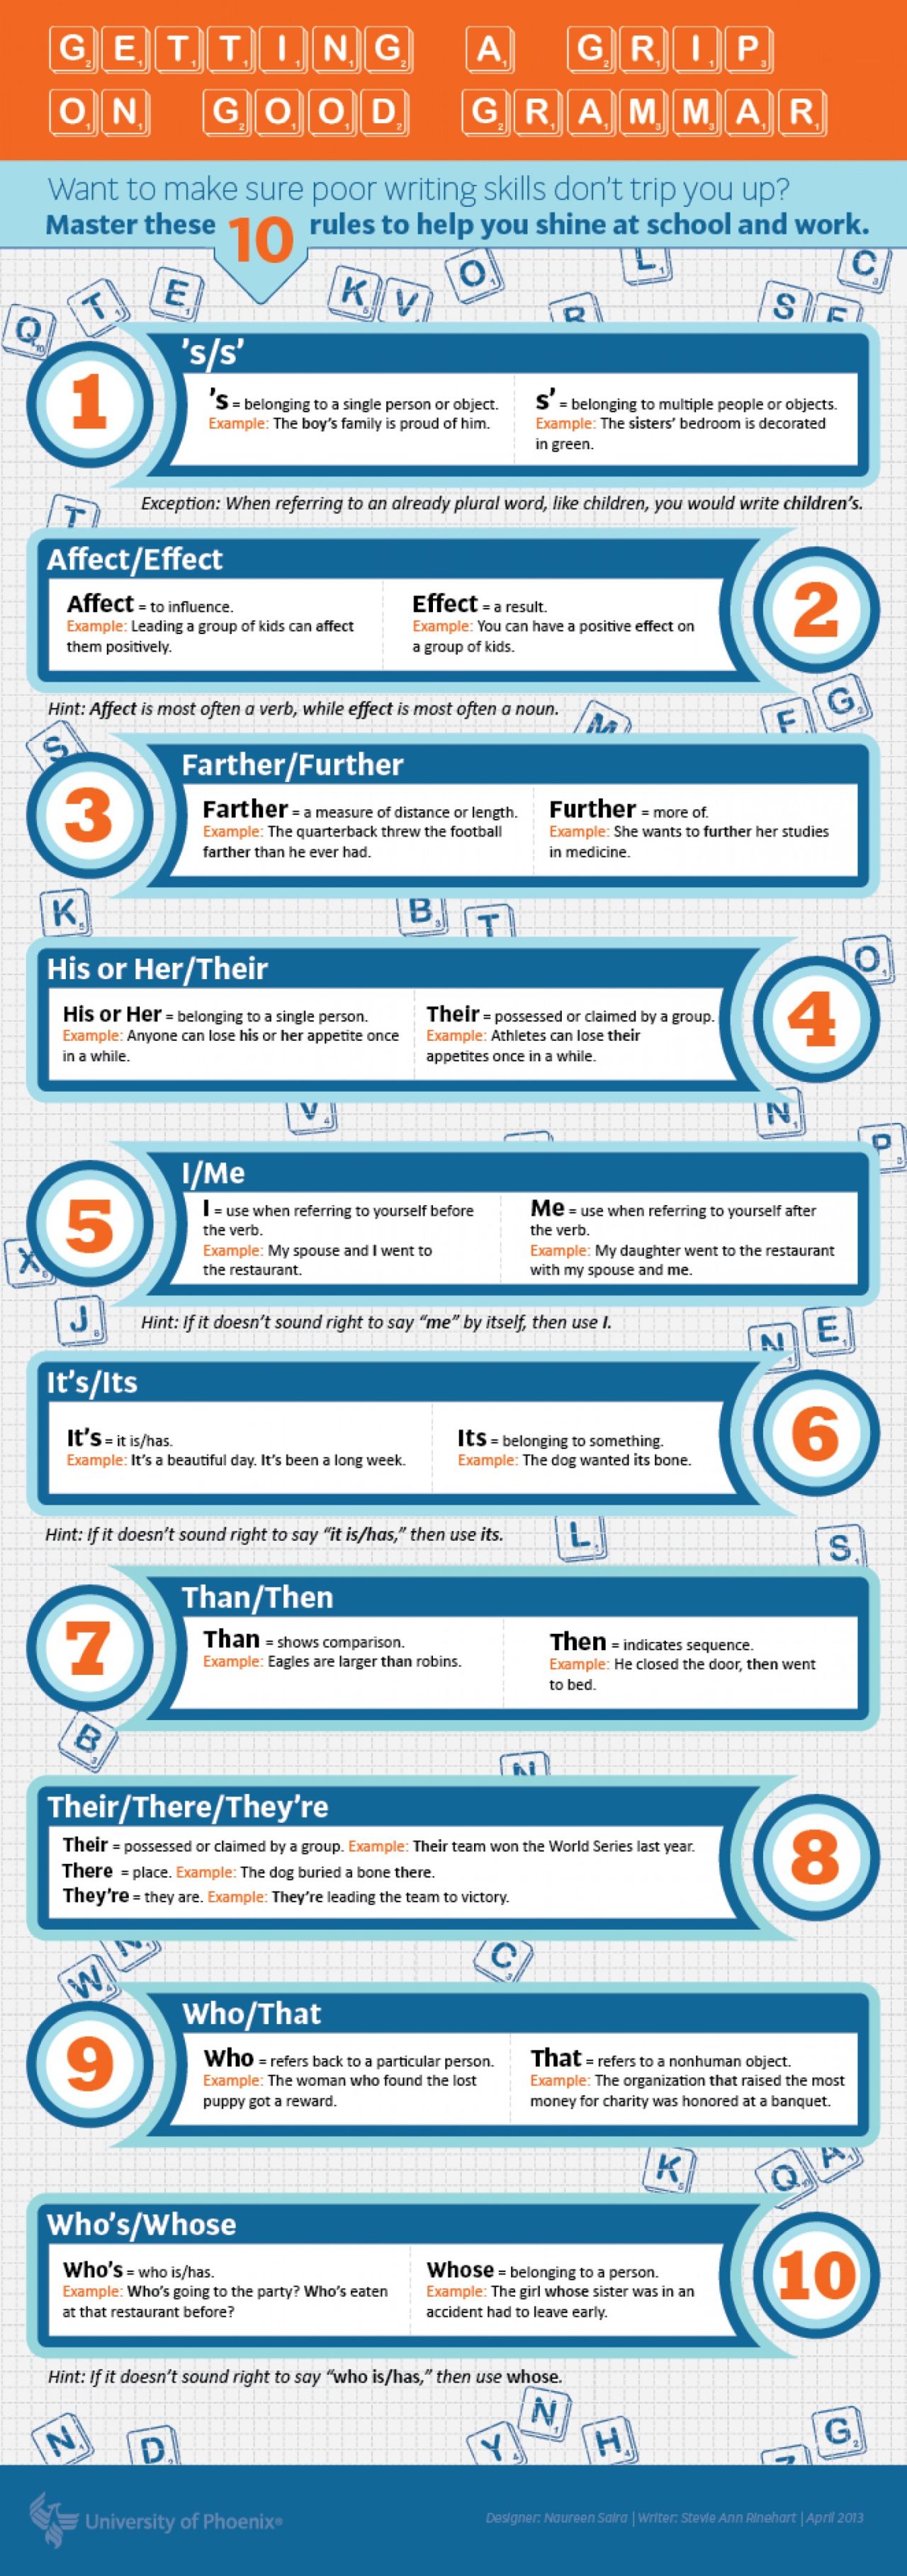 10 Common Grammar Mistakes And How To Fix Them [Infographic]